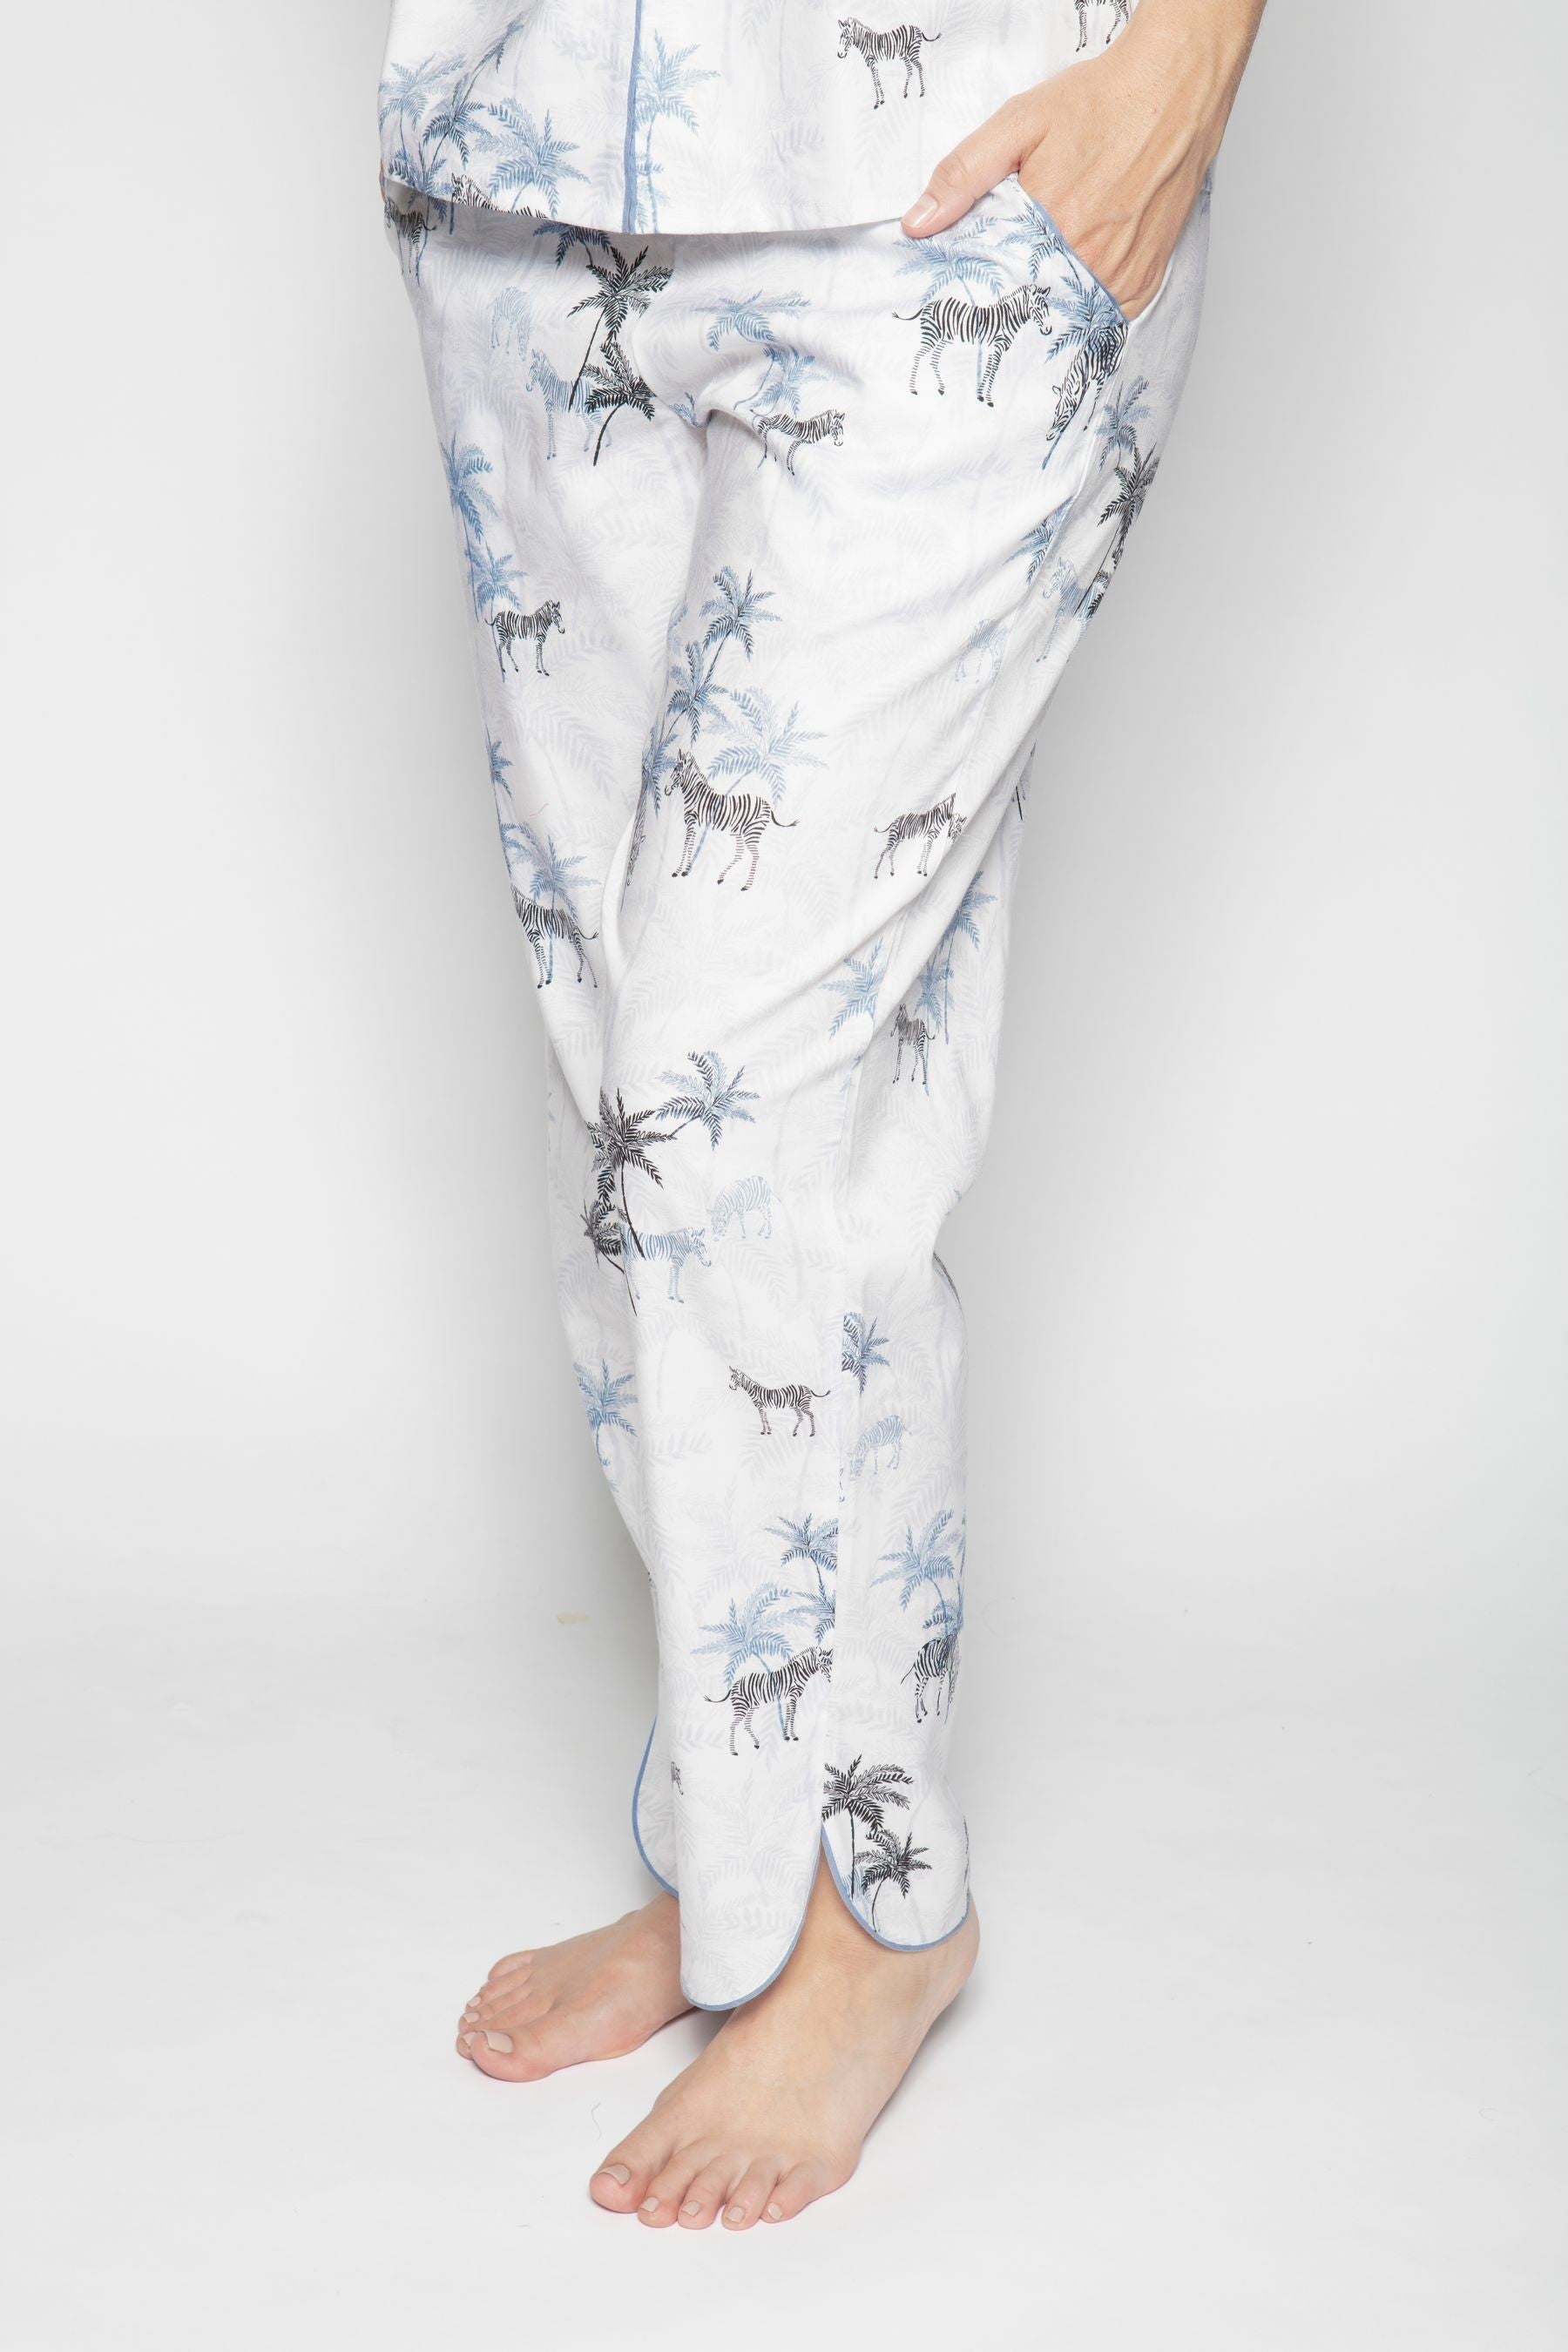 White Color Digital Abstract Printed loungewear/Nightsuit For Women With Pants.